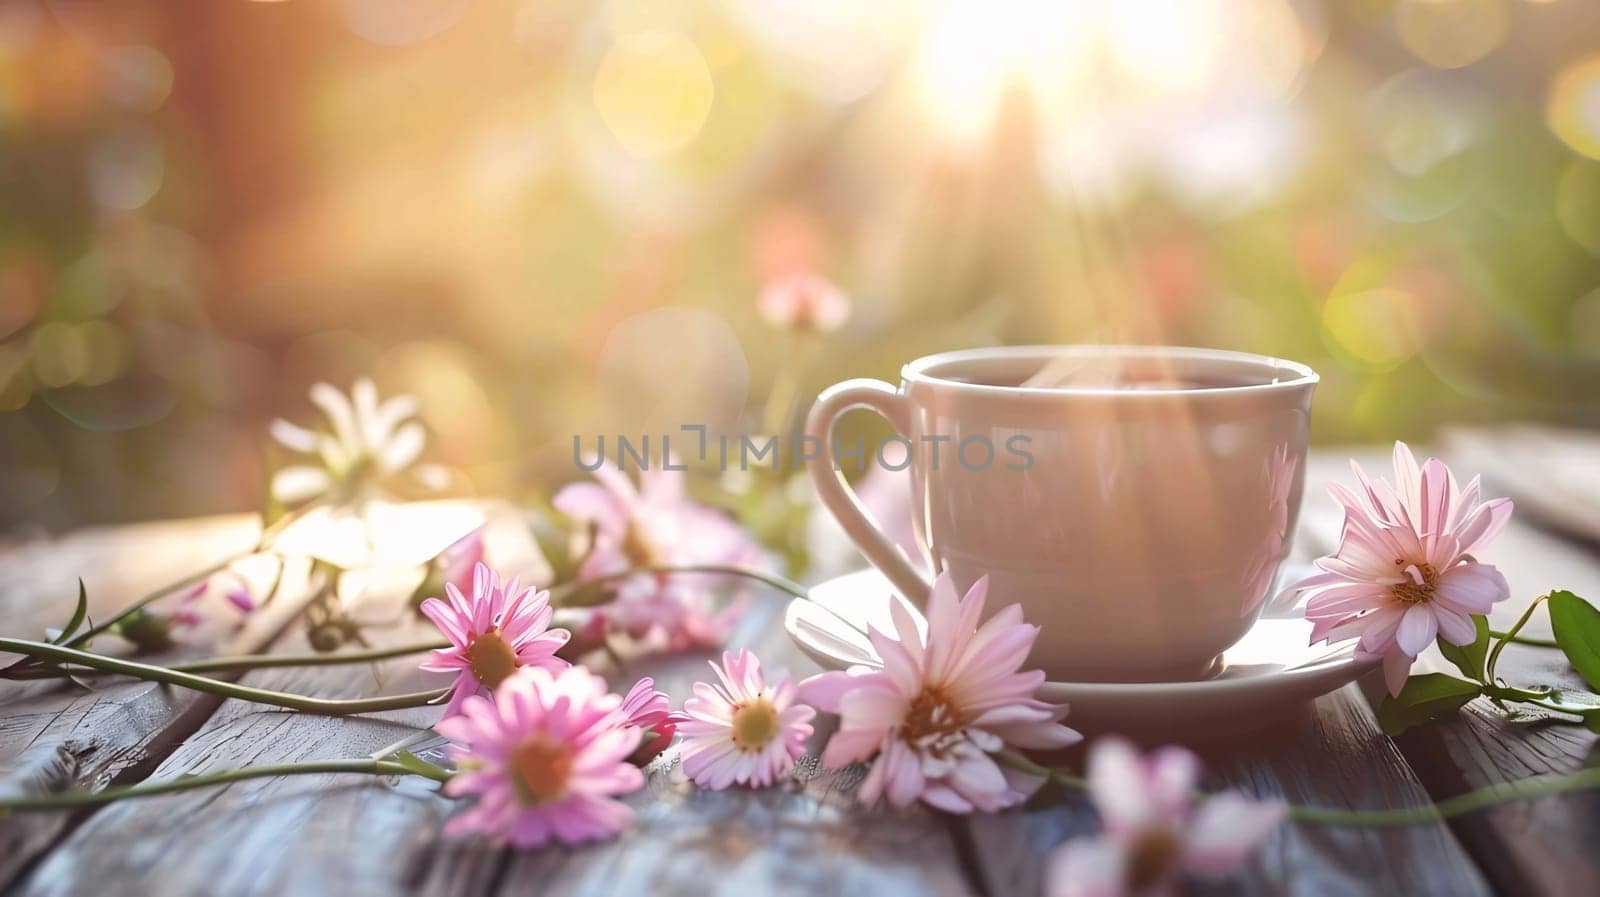 Cup of coffee on a plate on wooden boards around pink flowers, Blurred green background. Flowering flowers, a symbol of spring, new life. by ThemesS